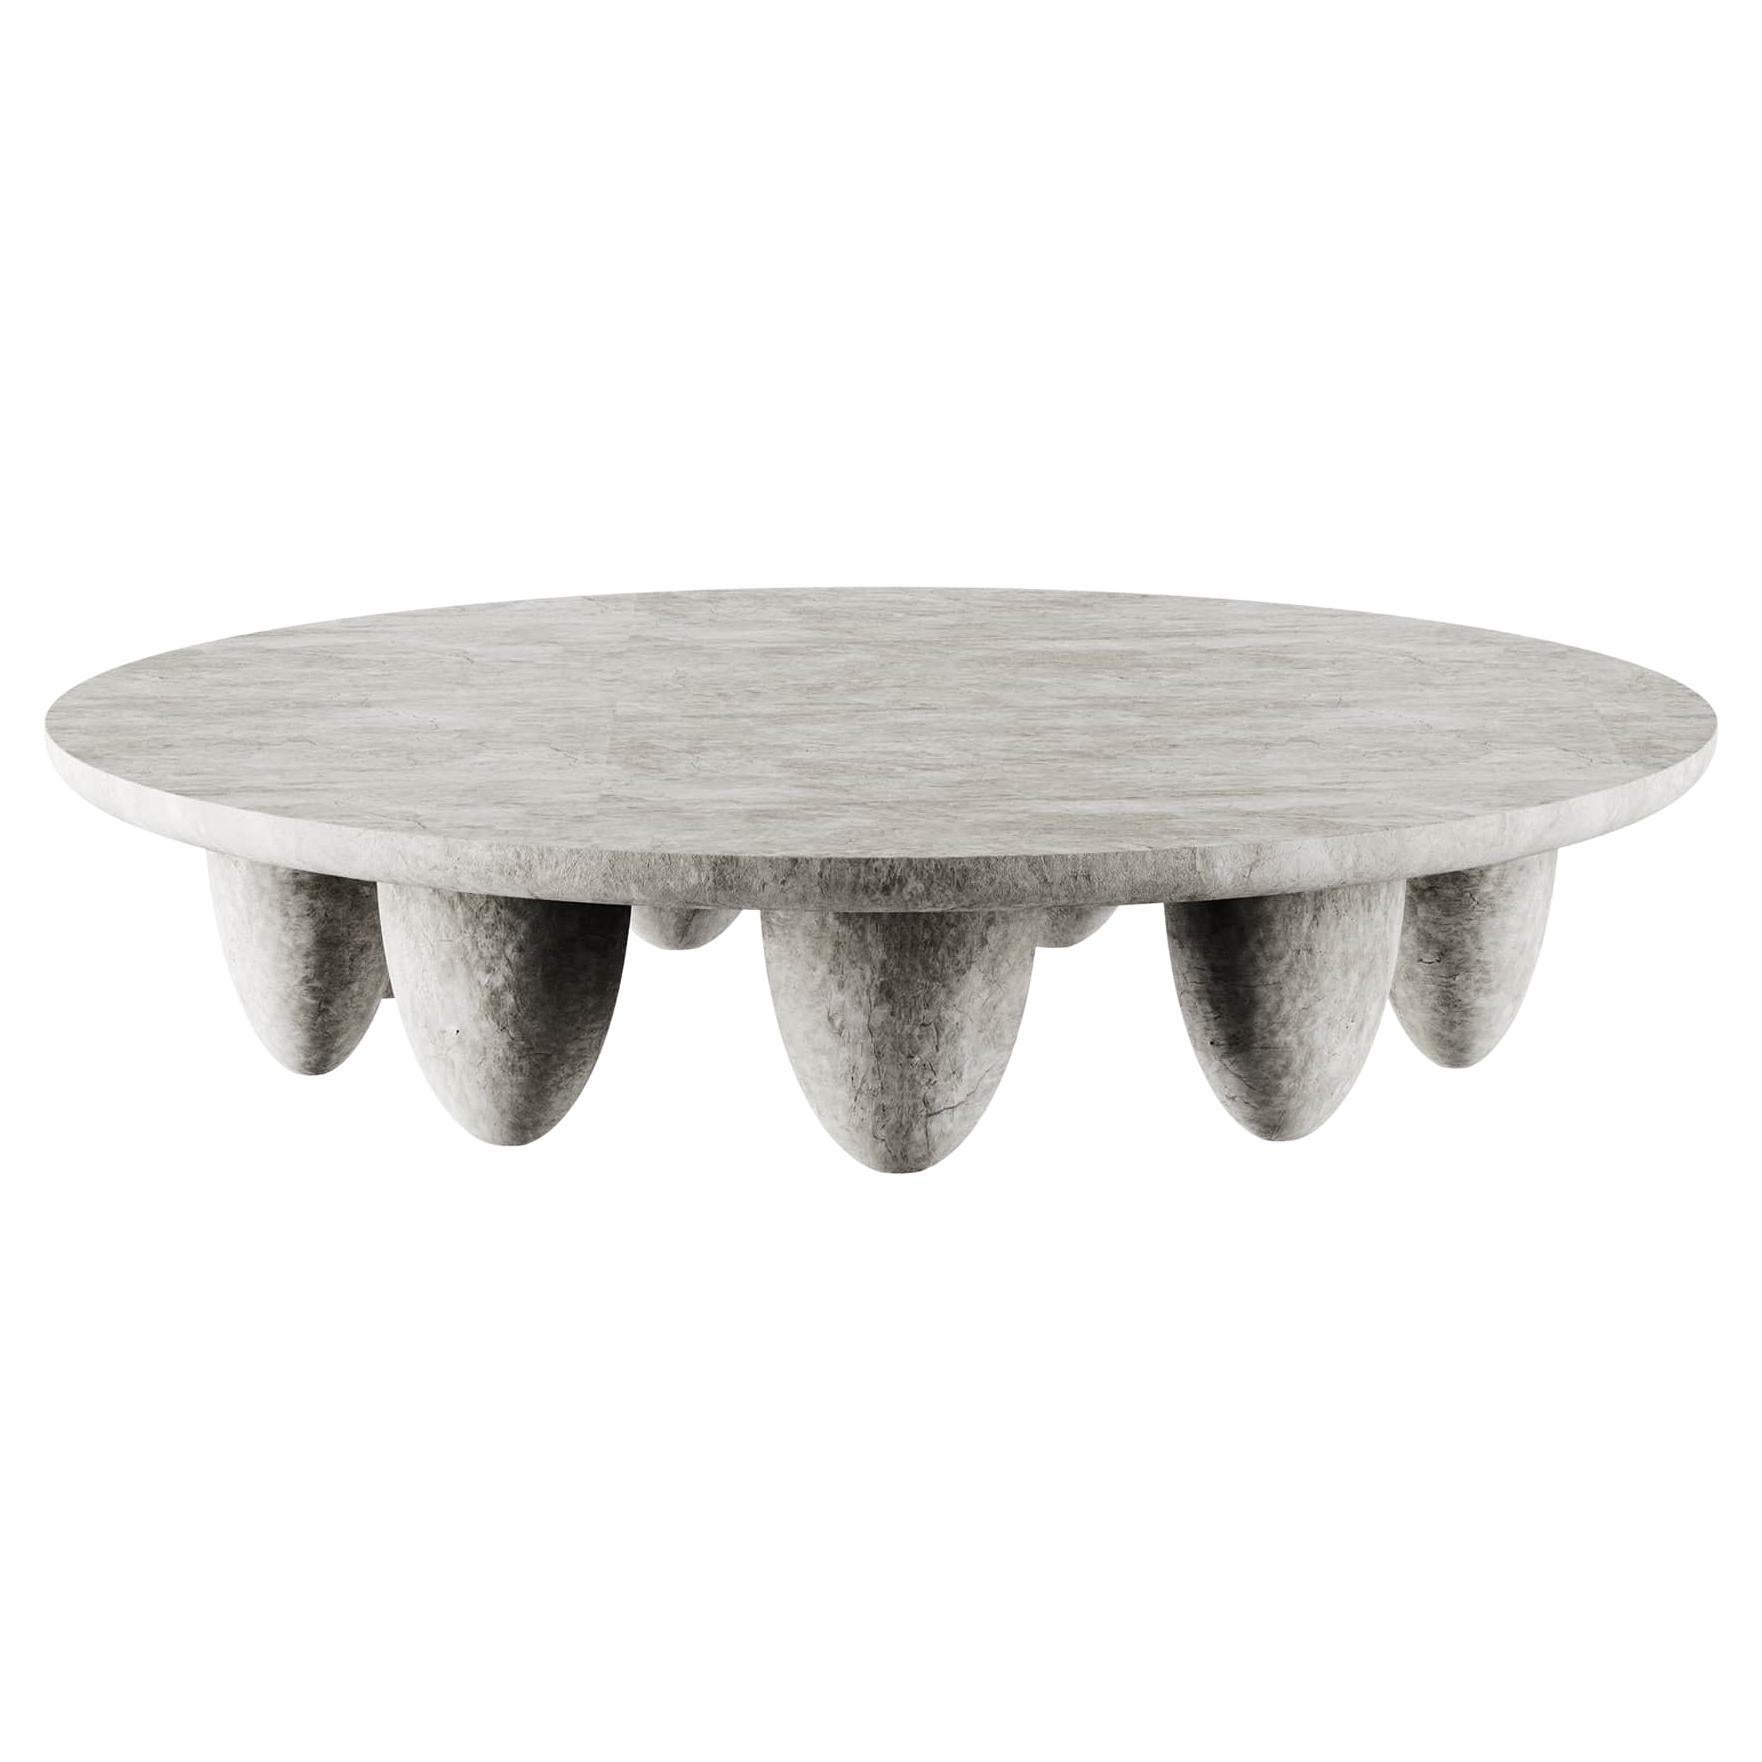 Contemporary Minimal Outdoor Indoor Round Center Table in Grigio Tundra Marble For Sale